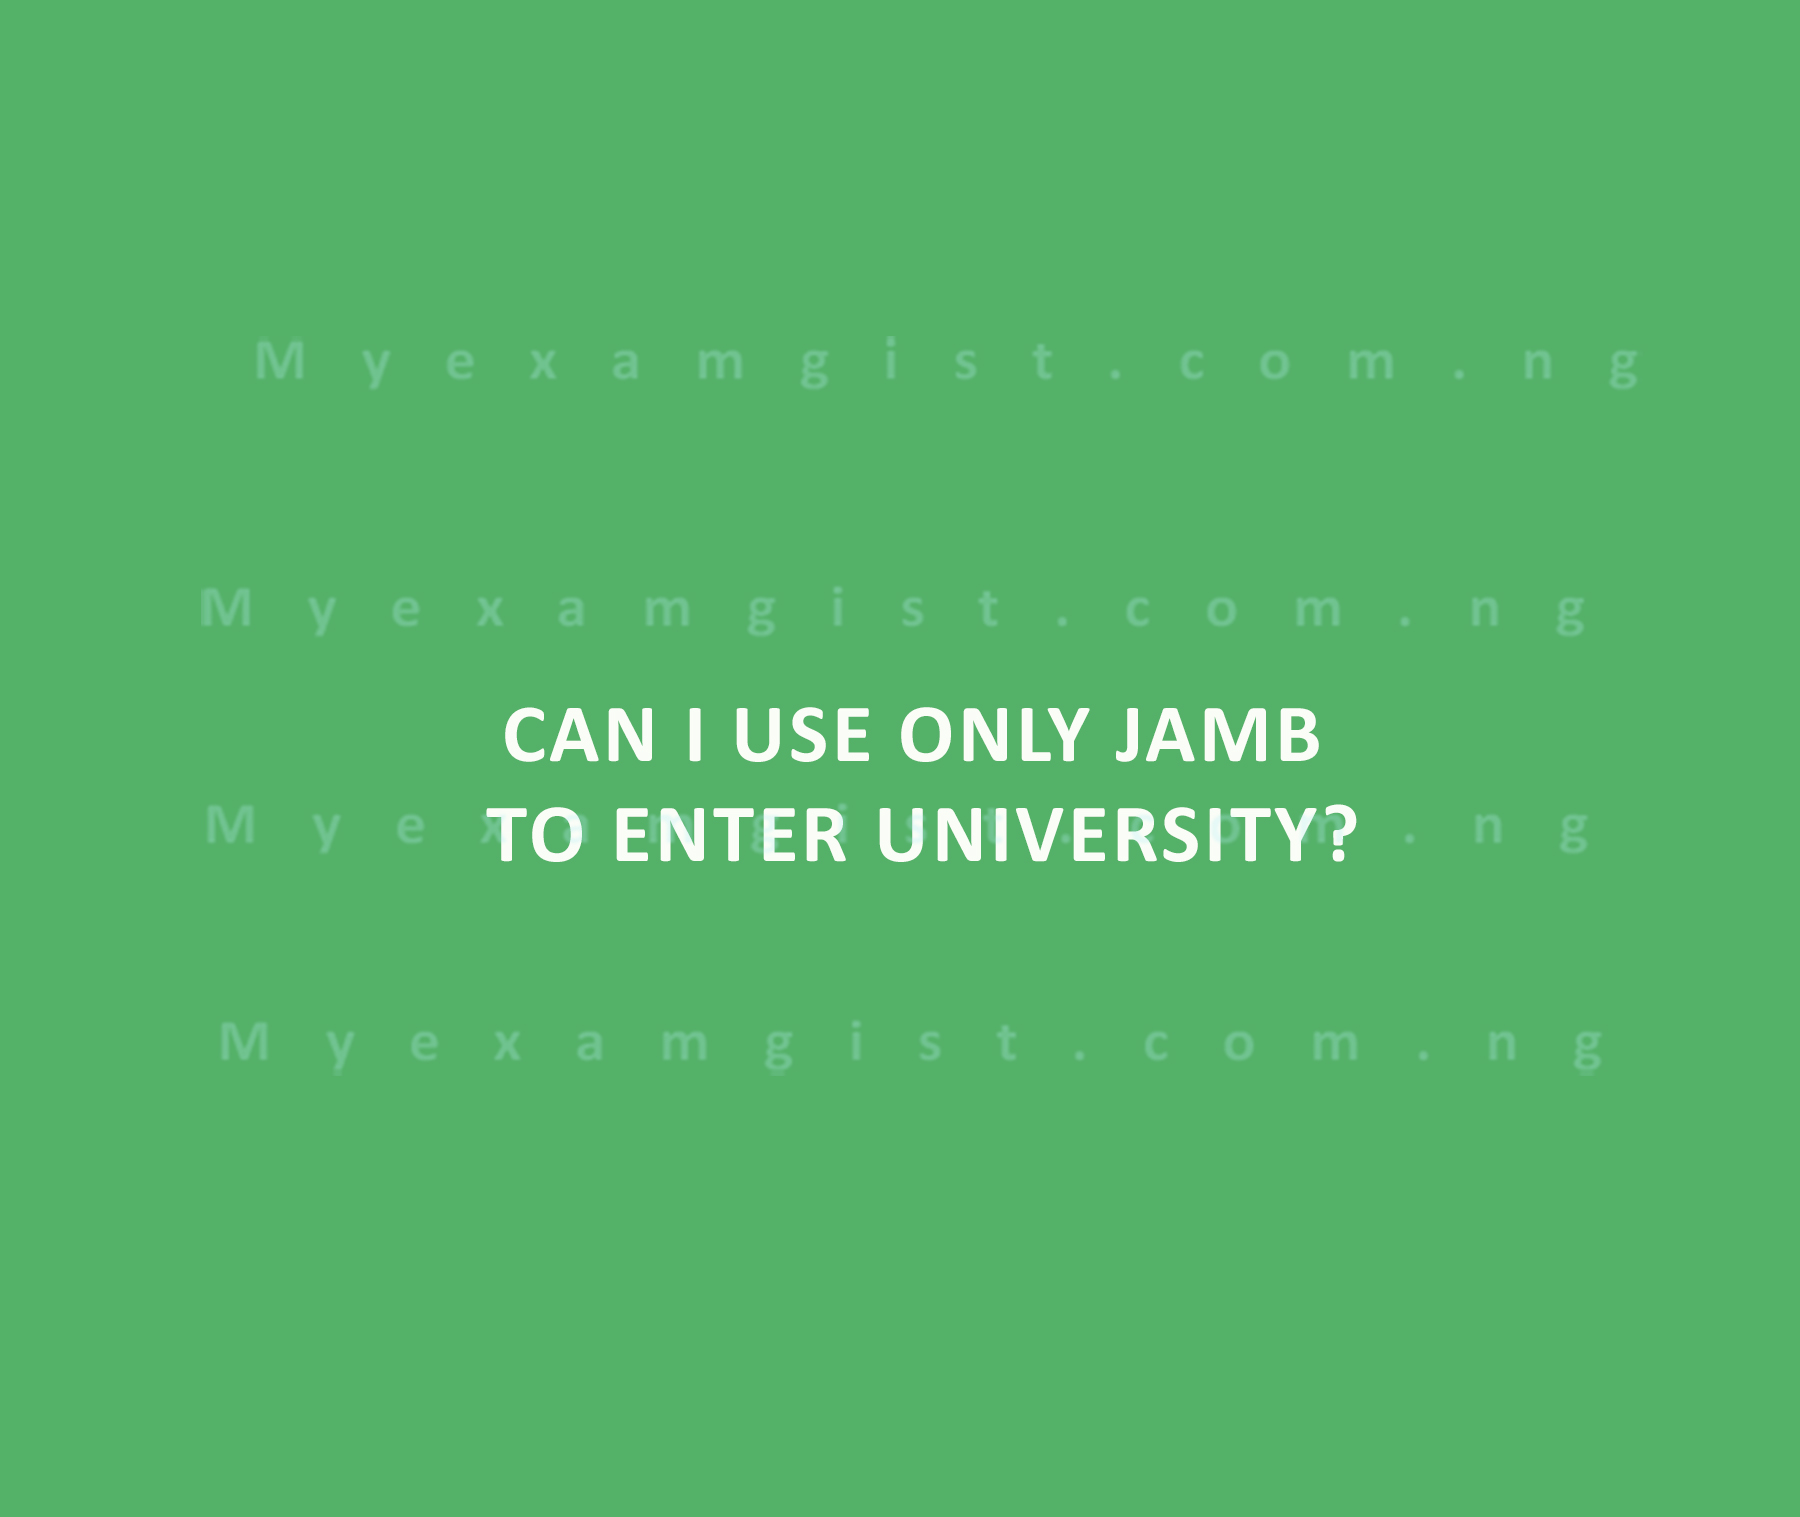 Can I use only JAMB to enter university?